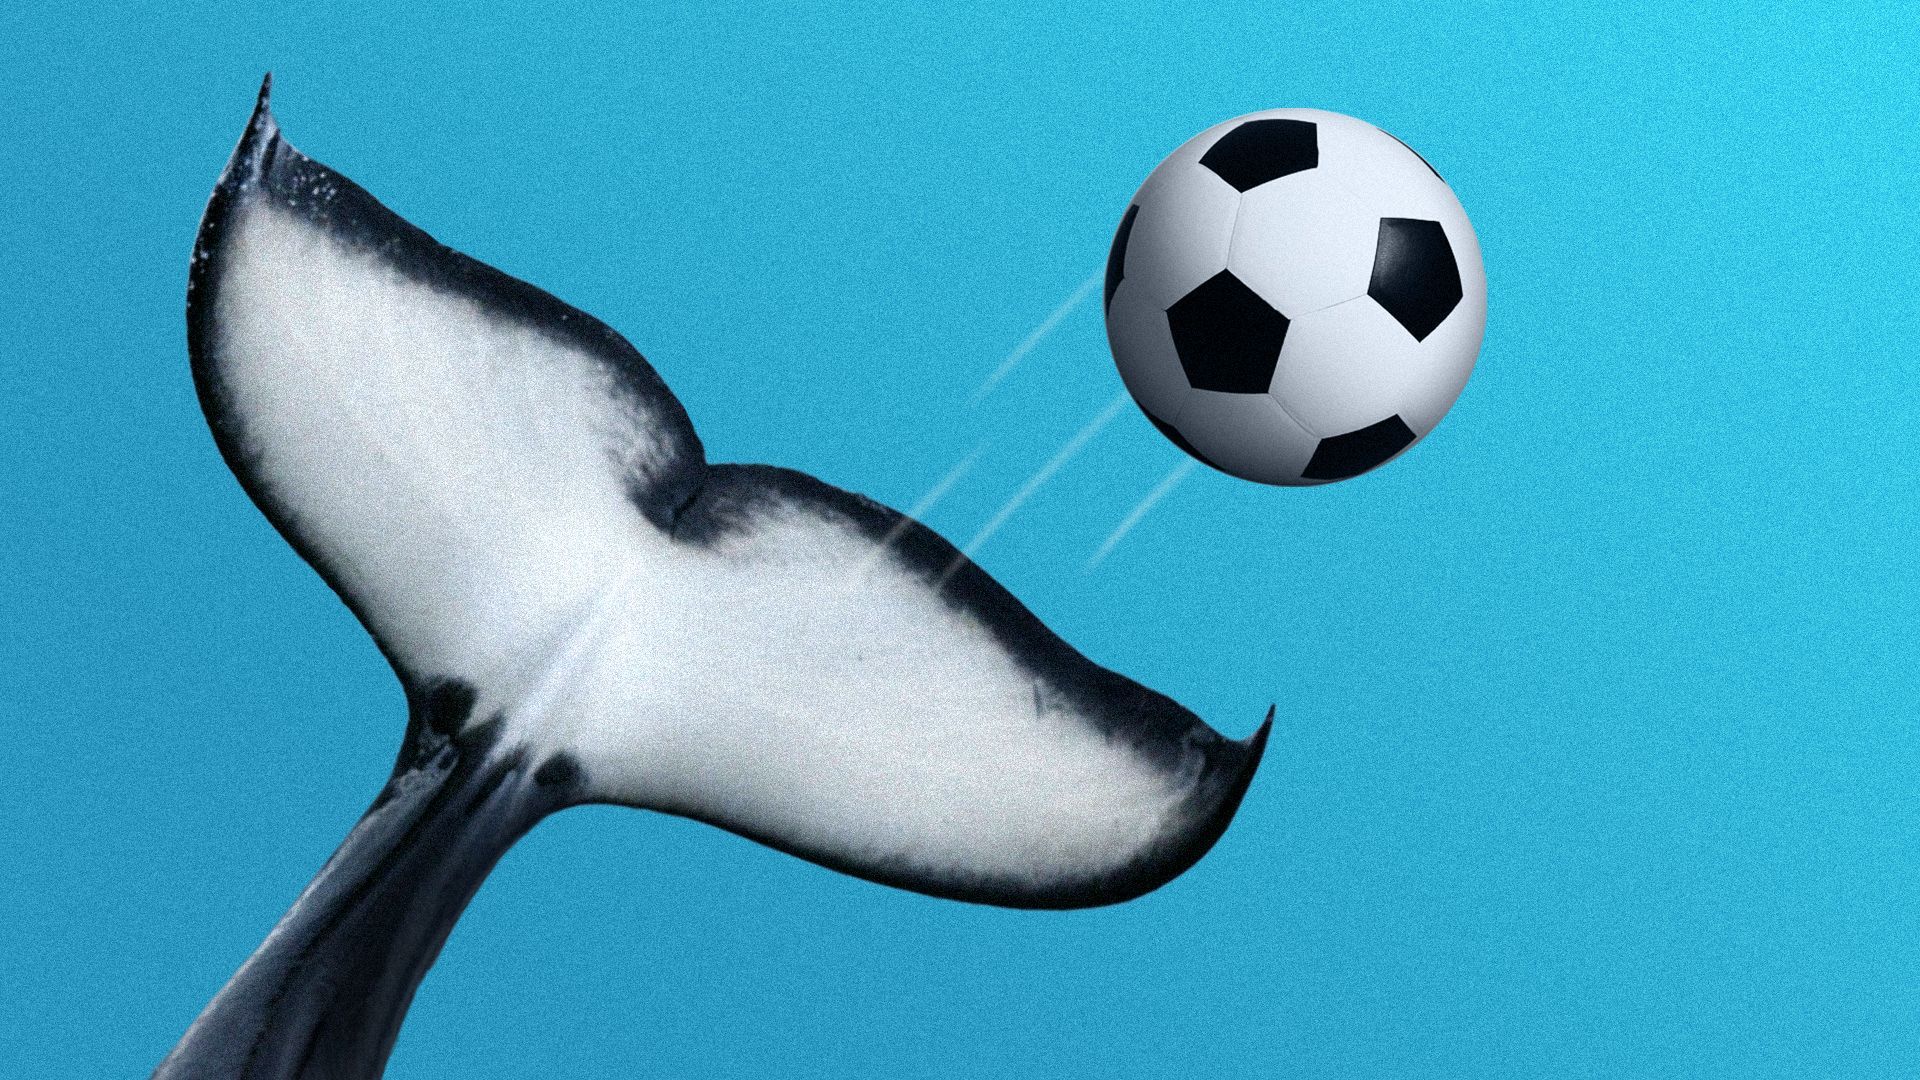 Illustration of an orca tail punting a soccer ball.